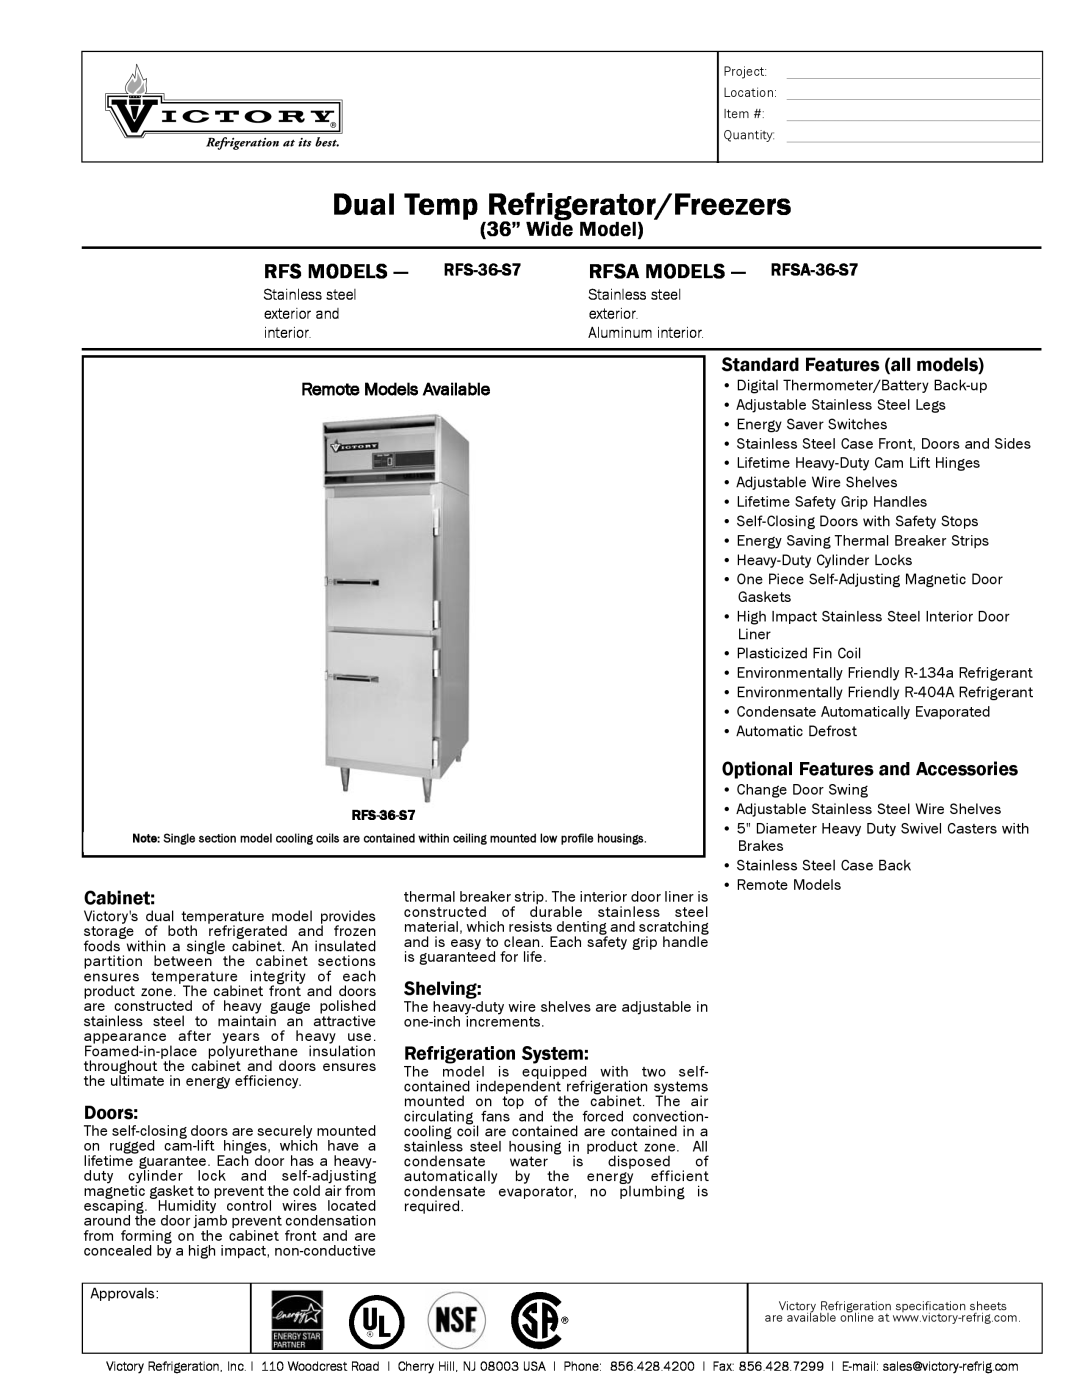 Victory Refrigeration specifications Dual Temp Refrigerator/Freezers, 36” Wide Model, RFS MODELS - RFS-36-S7, Cabinet 